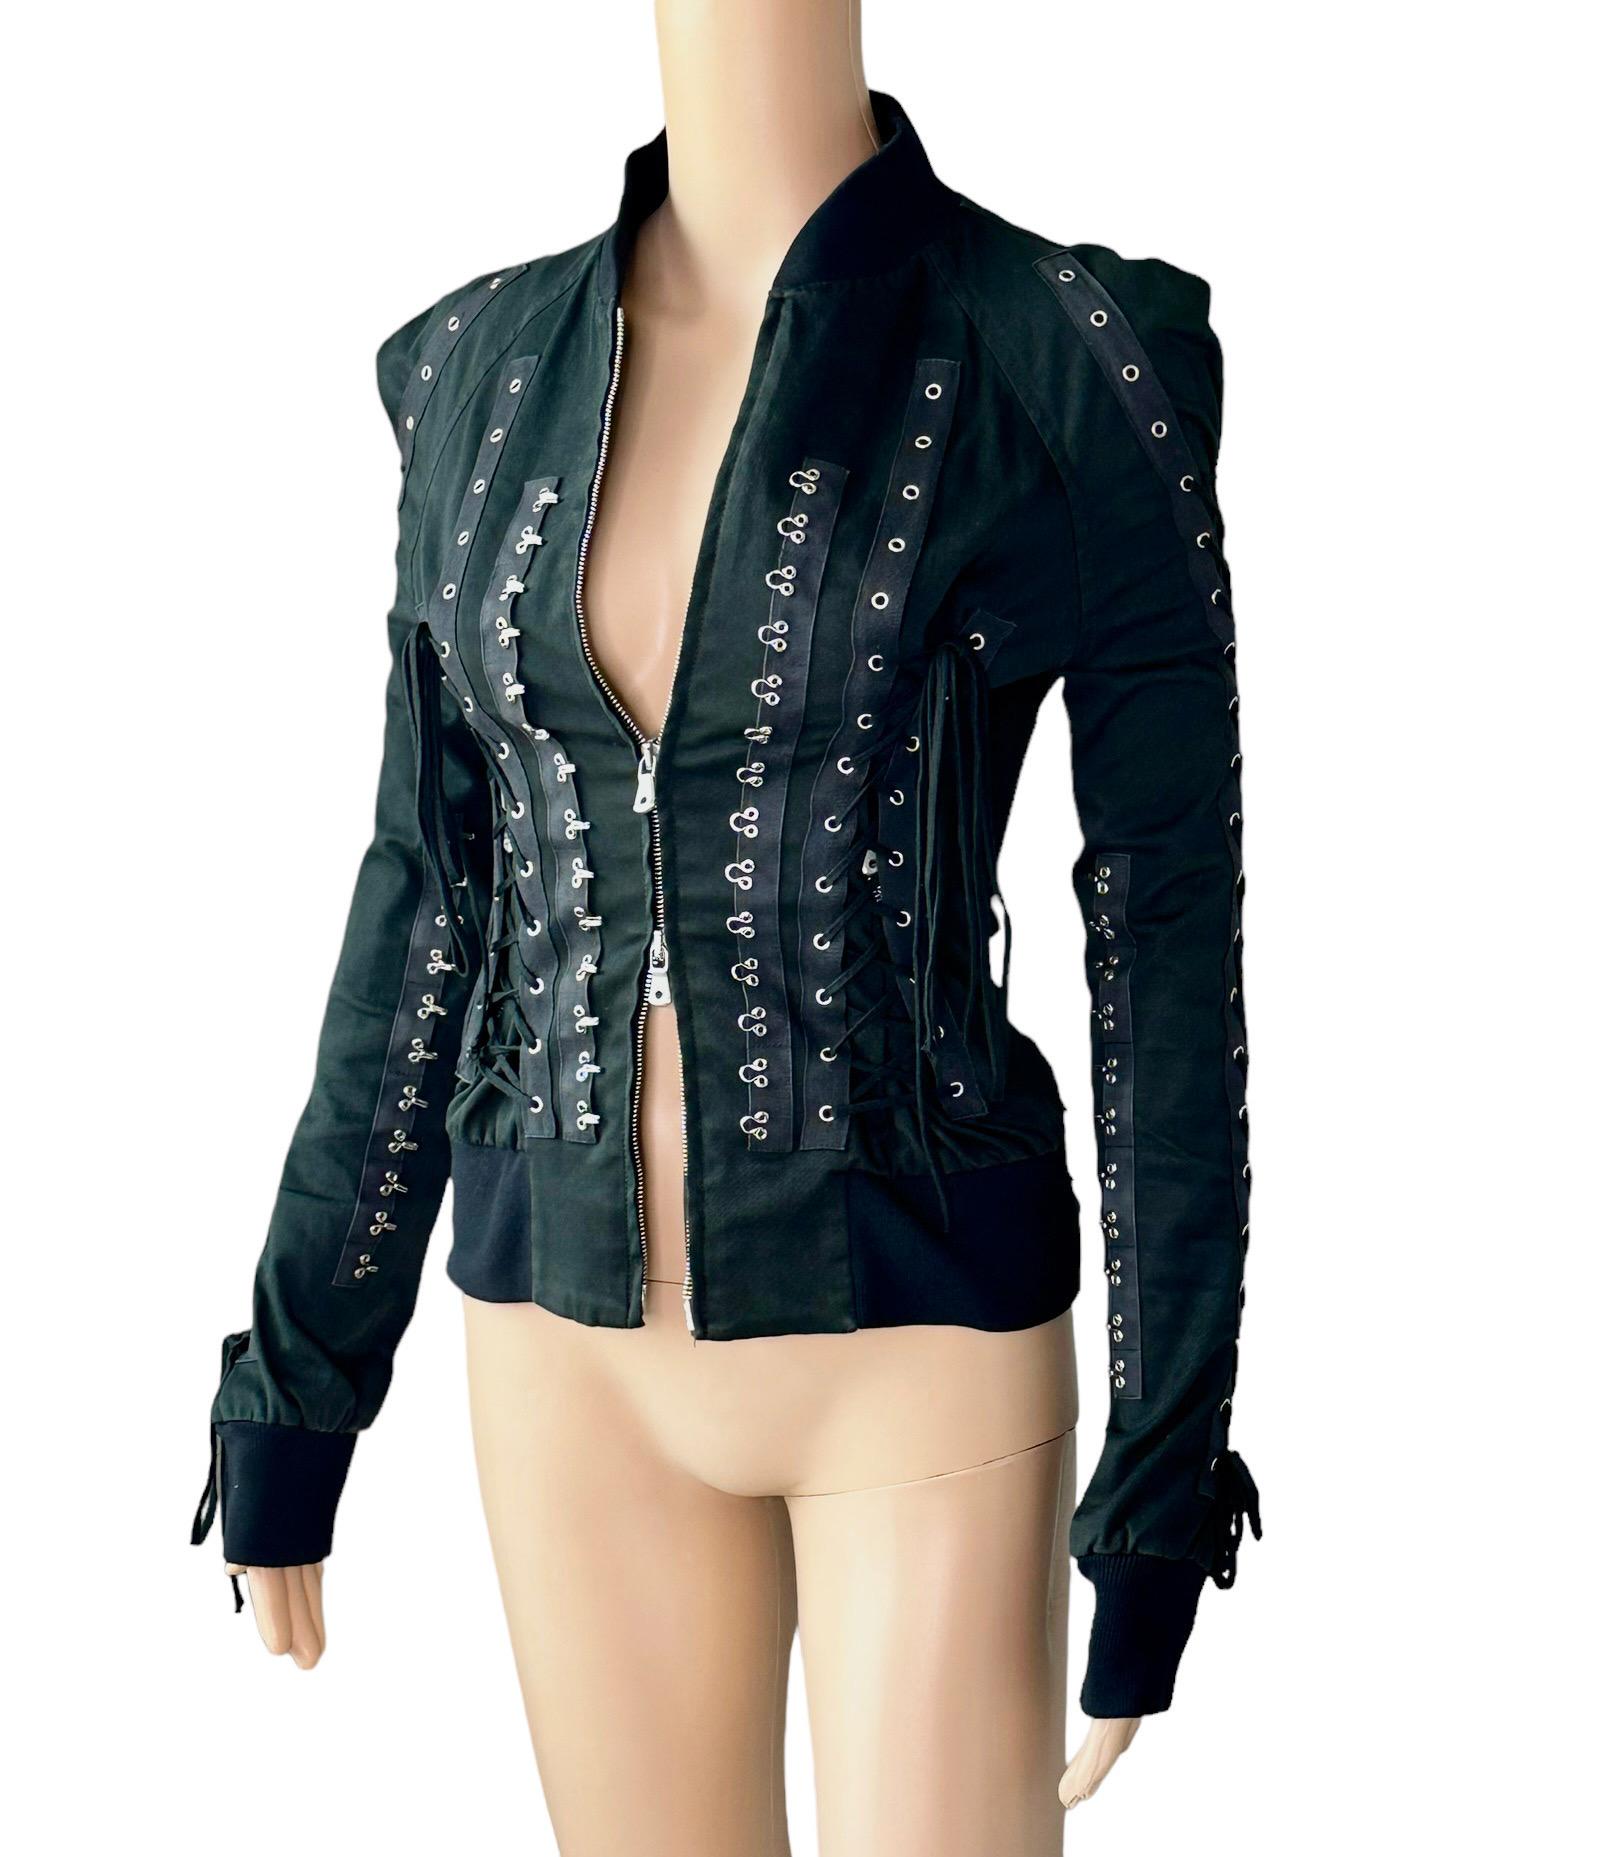 Dolce & Gabbana F/W 2003 Corset Lace Up Hook and Eye Black Top Jacket In Good Condition For Sale In Naples, FL